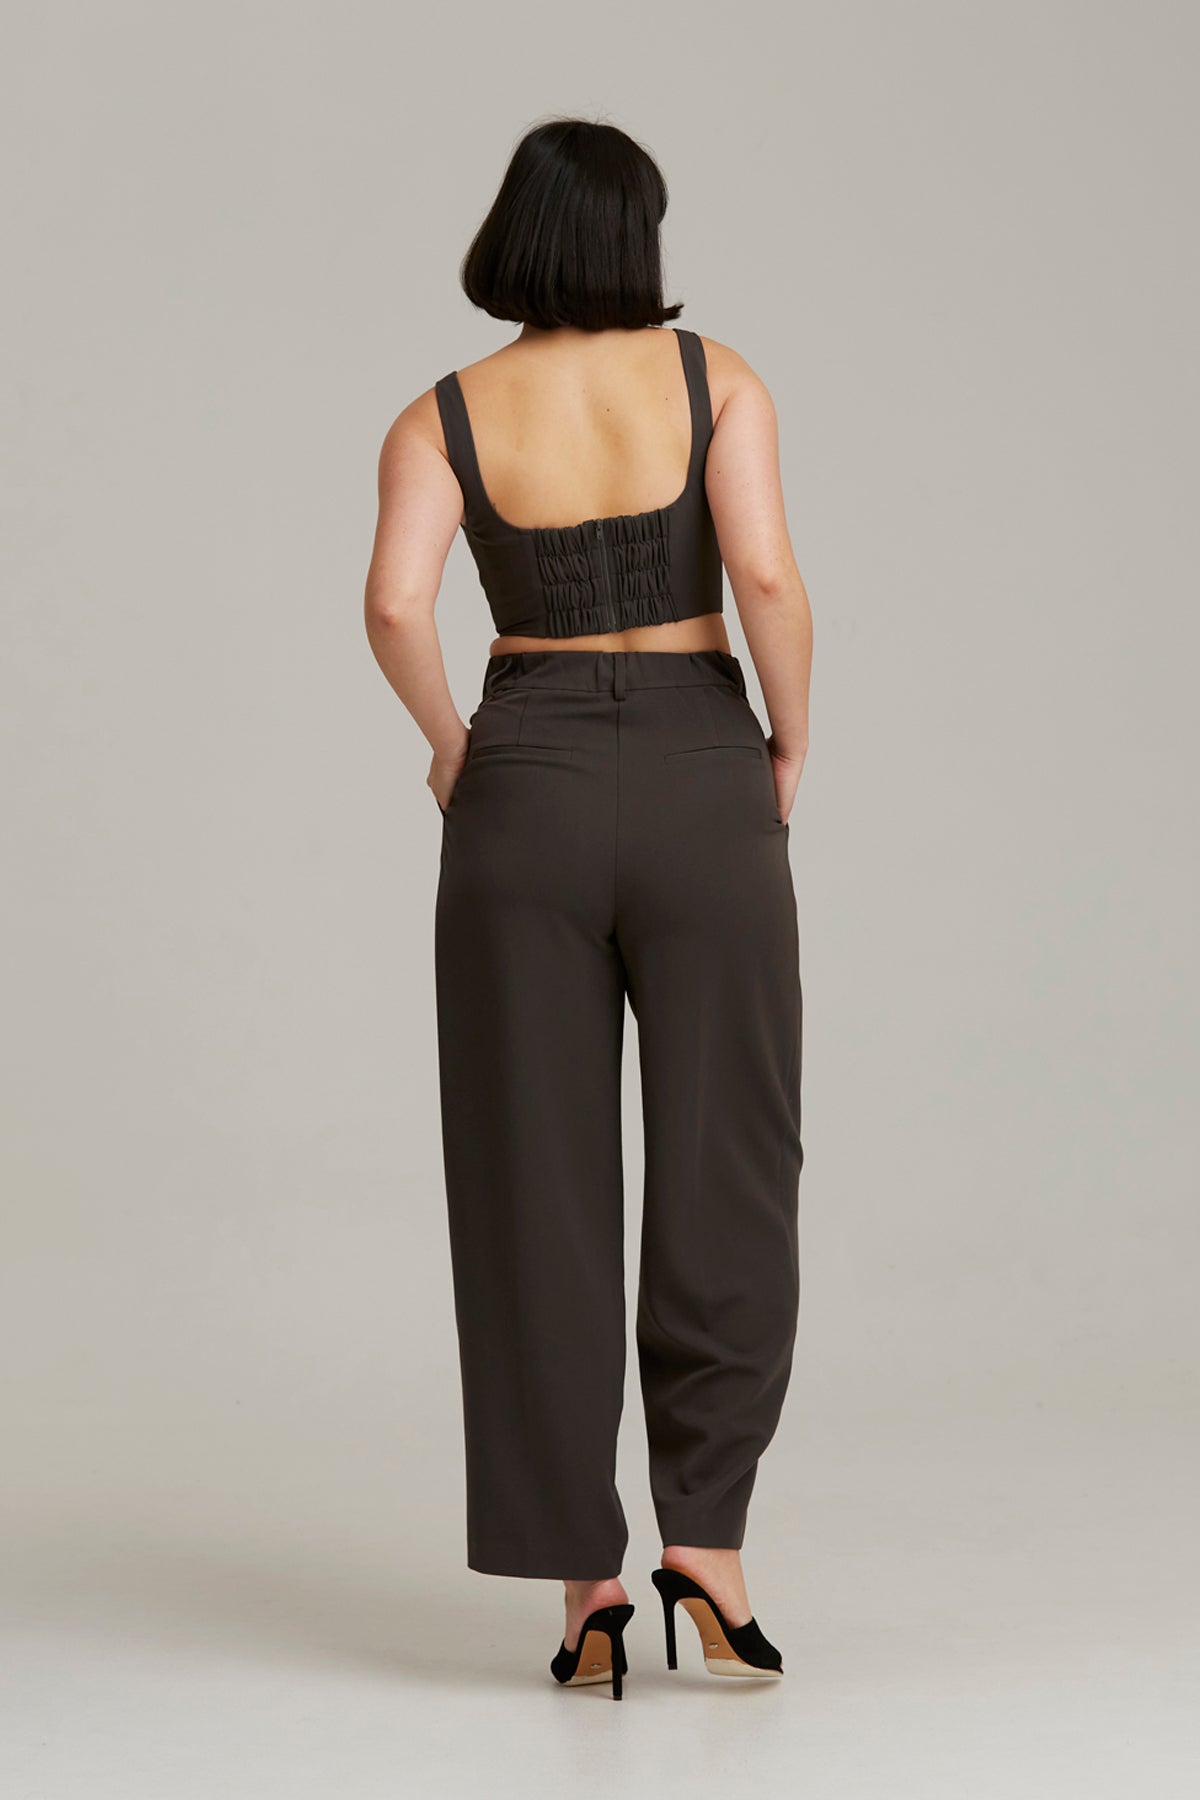 The Fifth Label - Realm Crop - Charcoal